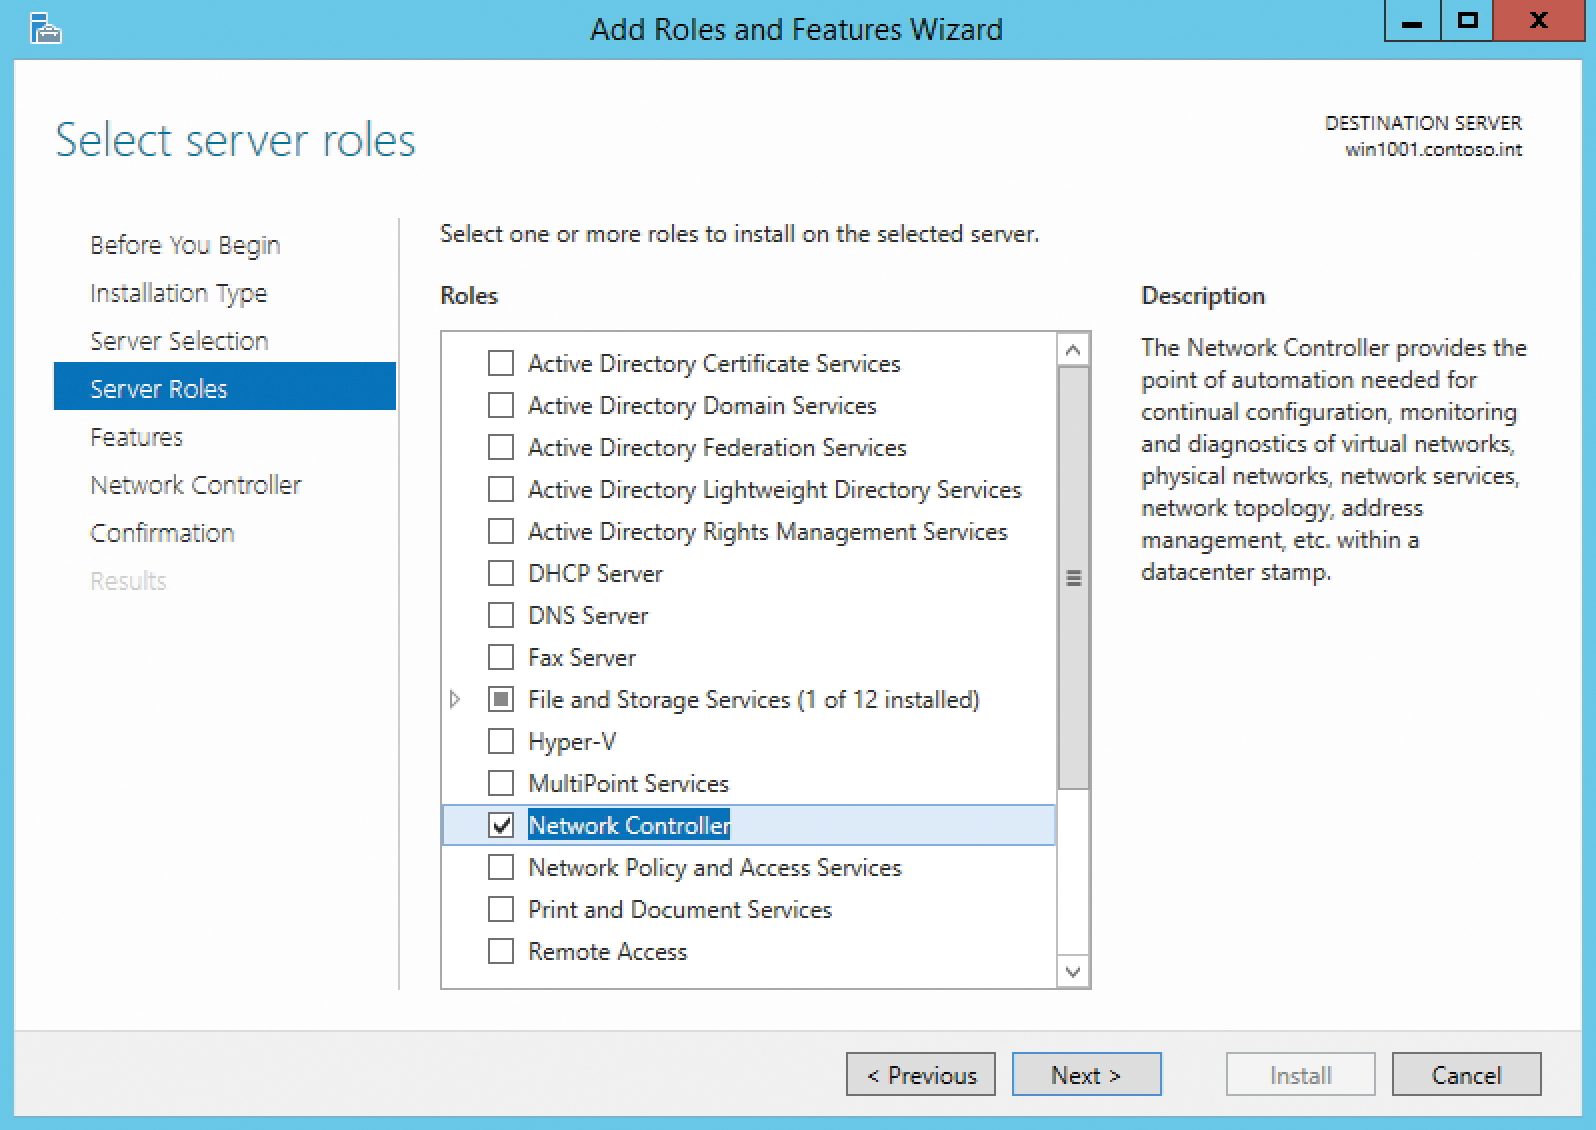 The Network Controller service is integrated in Windows Server vNext via Server Manager. 